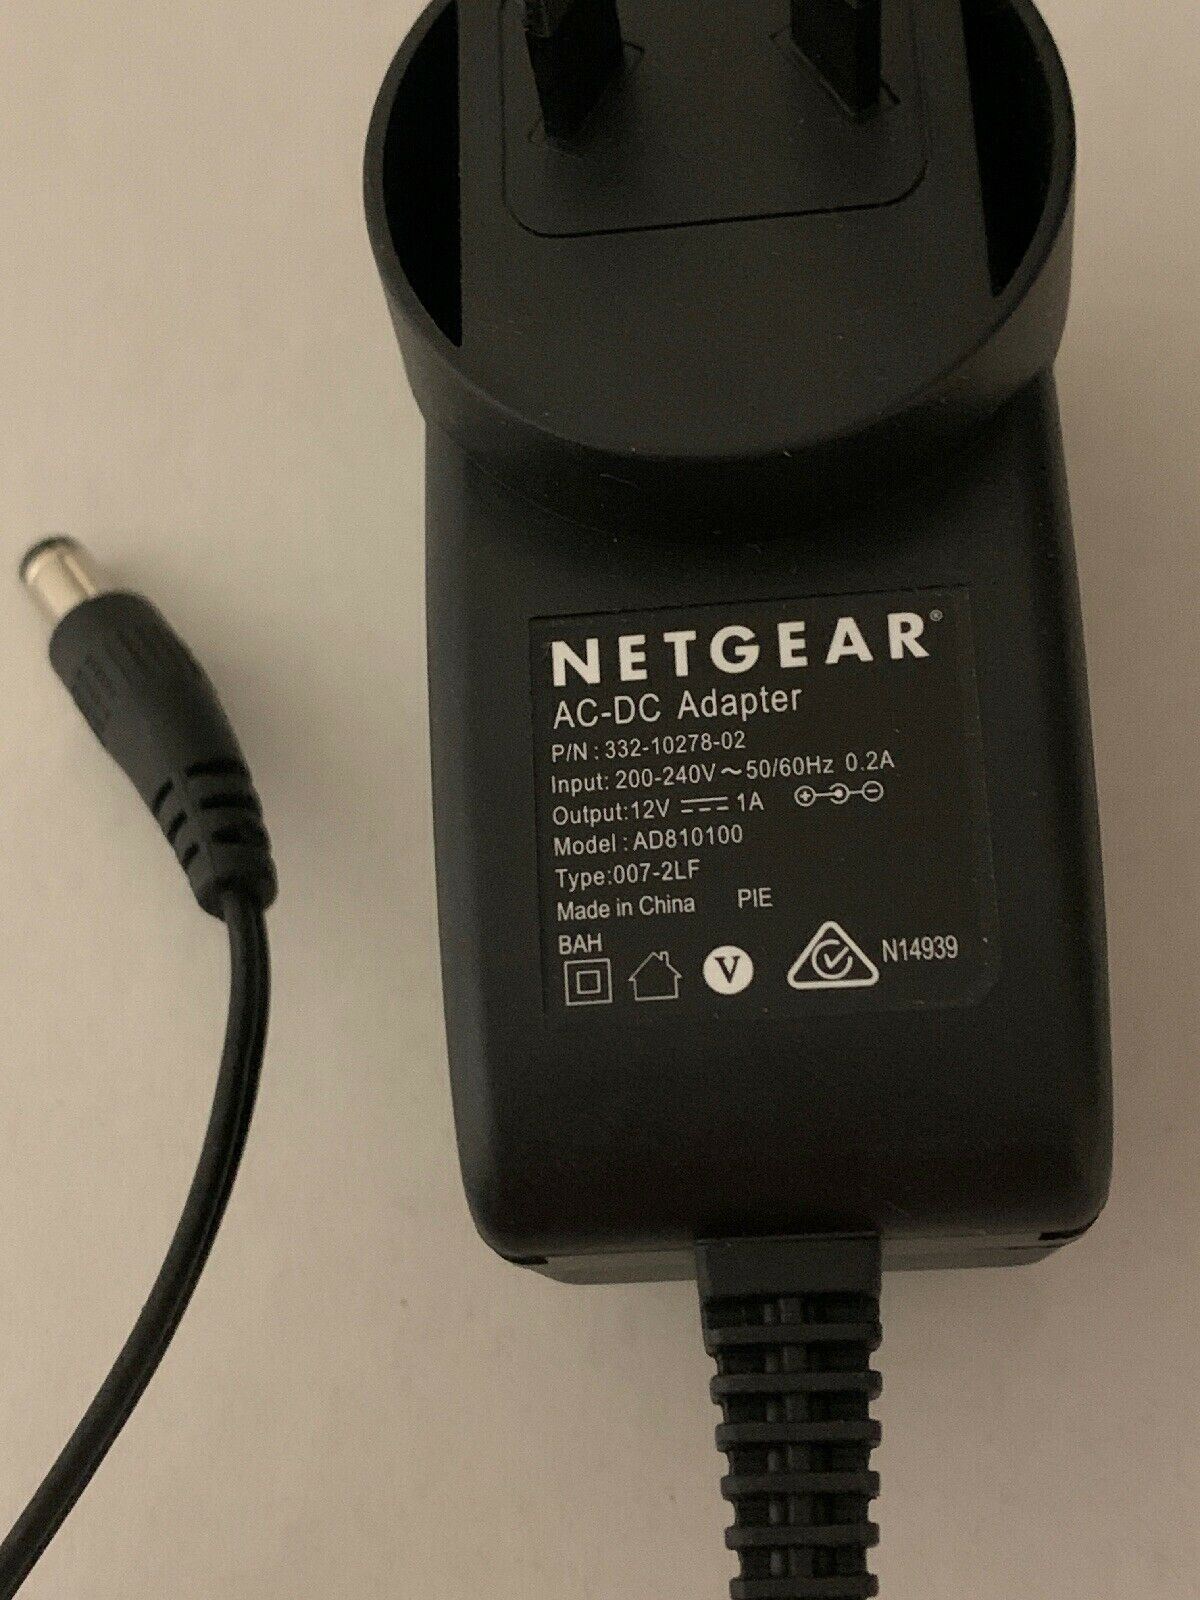 Genuine Netgear AD810100 AC Adapter 12V 1A For Router